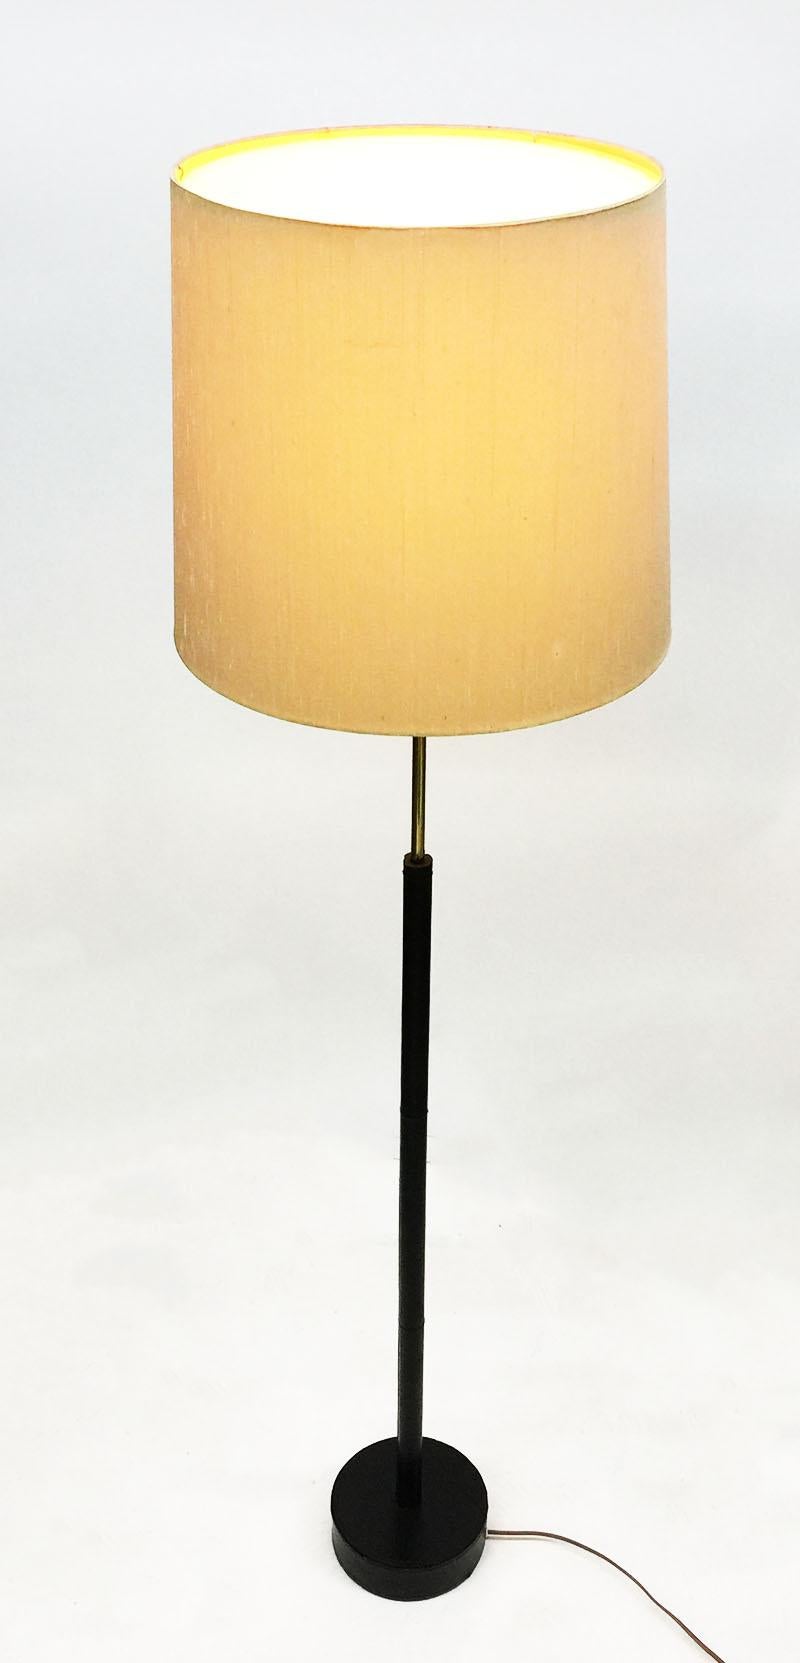 Swedish leather and brass floor lamp by Bergboms, 1960s

Scandinavian midcentury floor lamp by Bergboms Sweden, 1960s
Covered with black stitched leather
The light switch is located at the top of the base, below the light ball 

Bergboms also